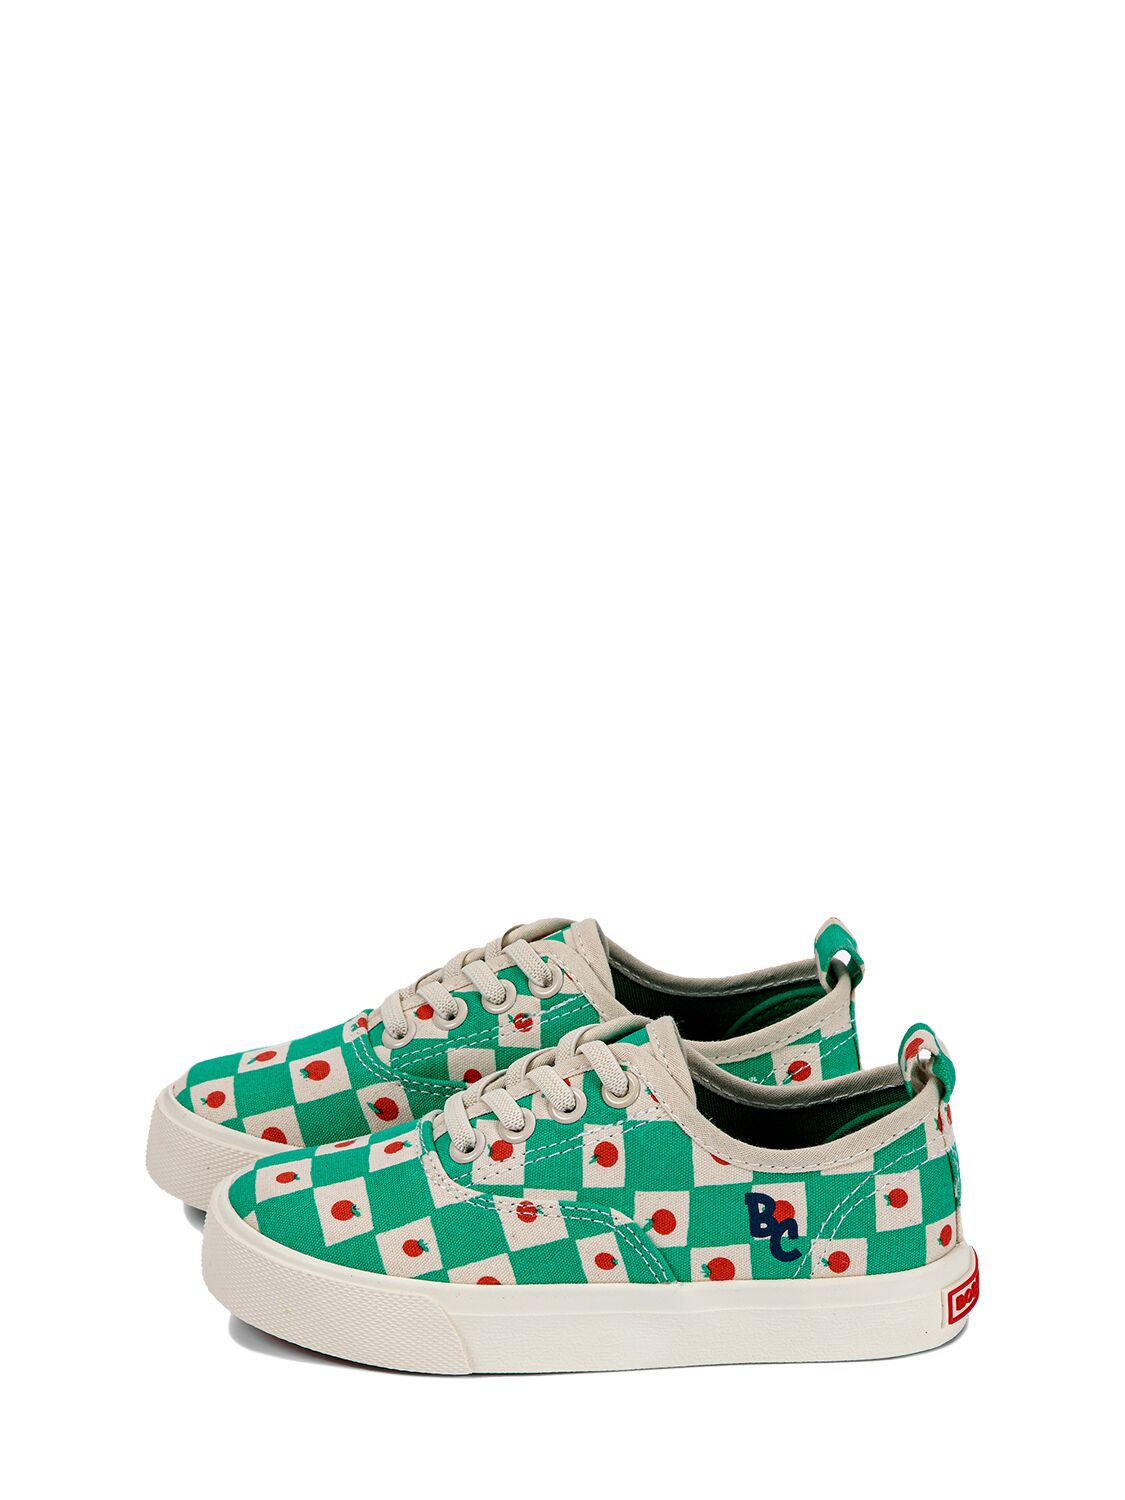 Bobo Choses Kids' Printed Organic Cotton Lace-up Sneakers In Green